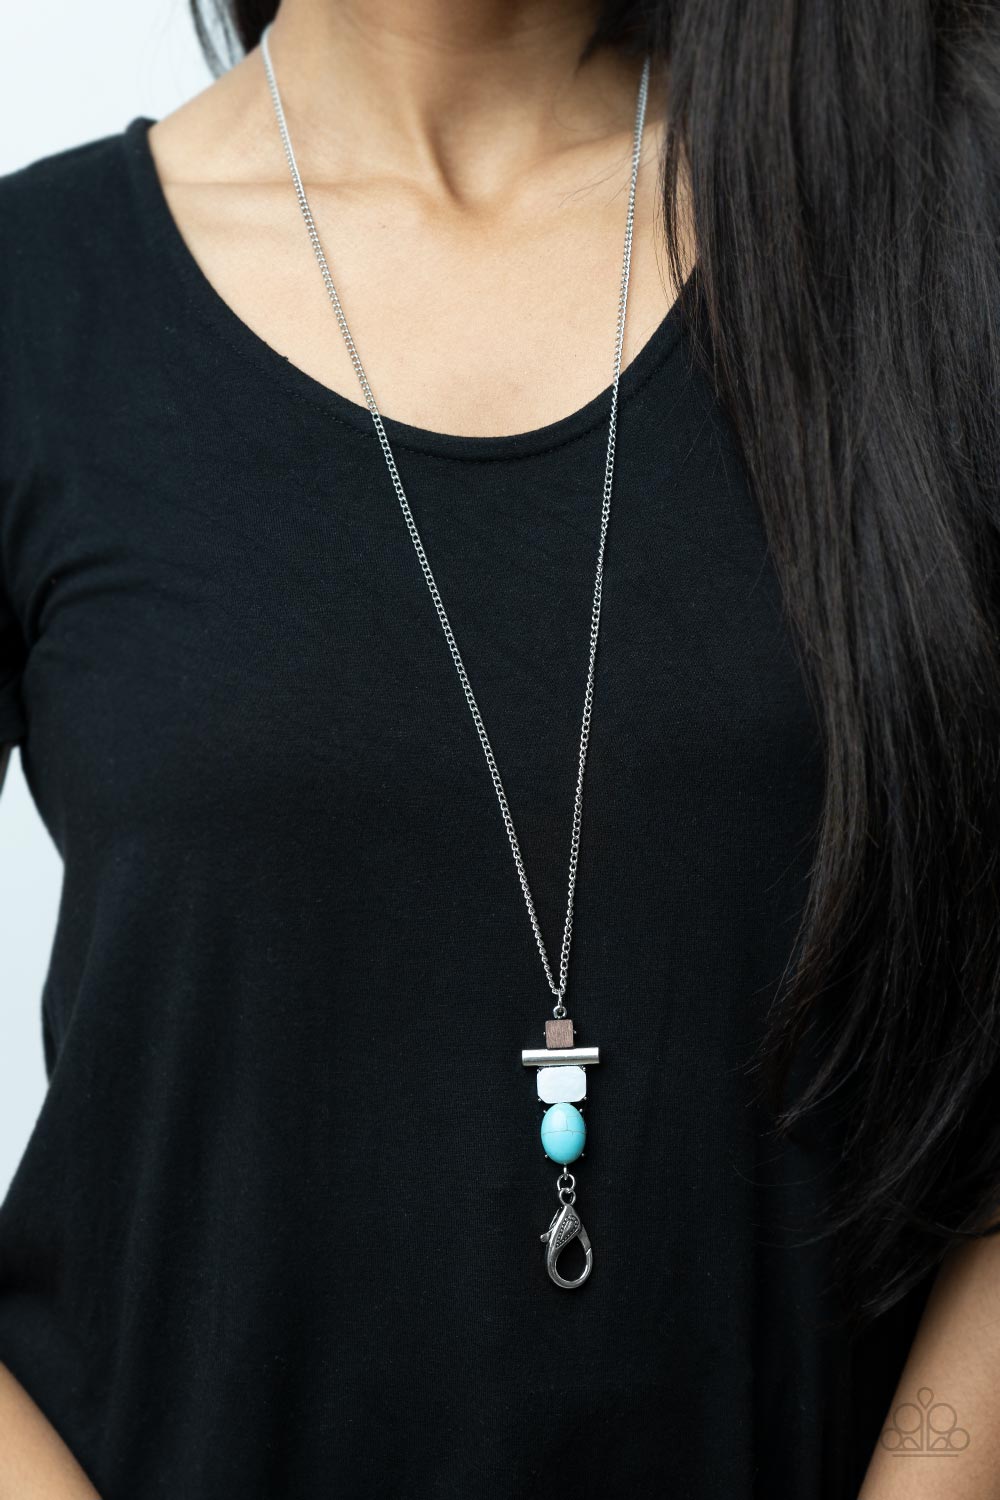 Natural Novice Turquoise Blue Stone and Wood Lanyard Necklace - Paparazzi Accessories- lightbox - CarasShop.com - $5 Jewelry by Cara Jewels